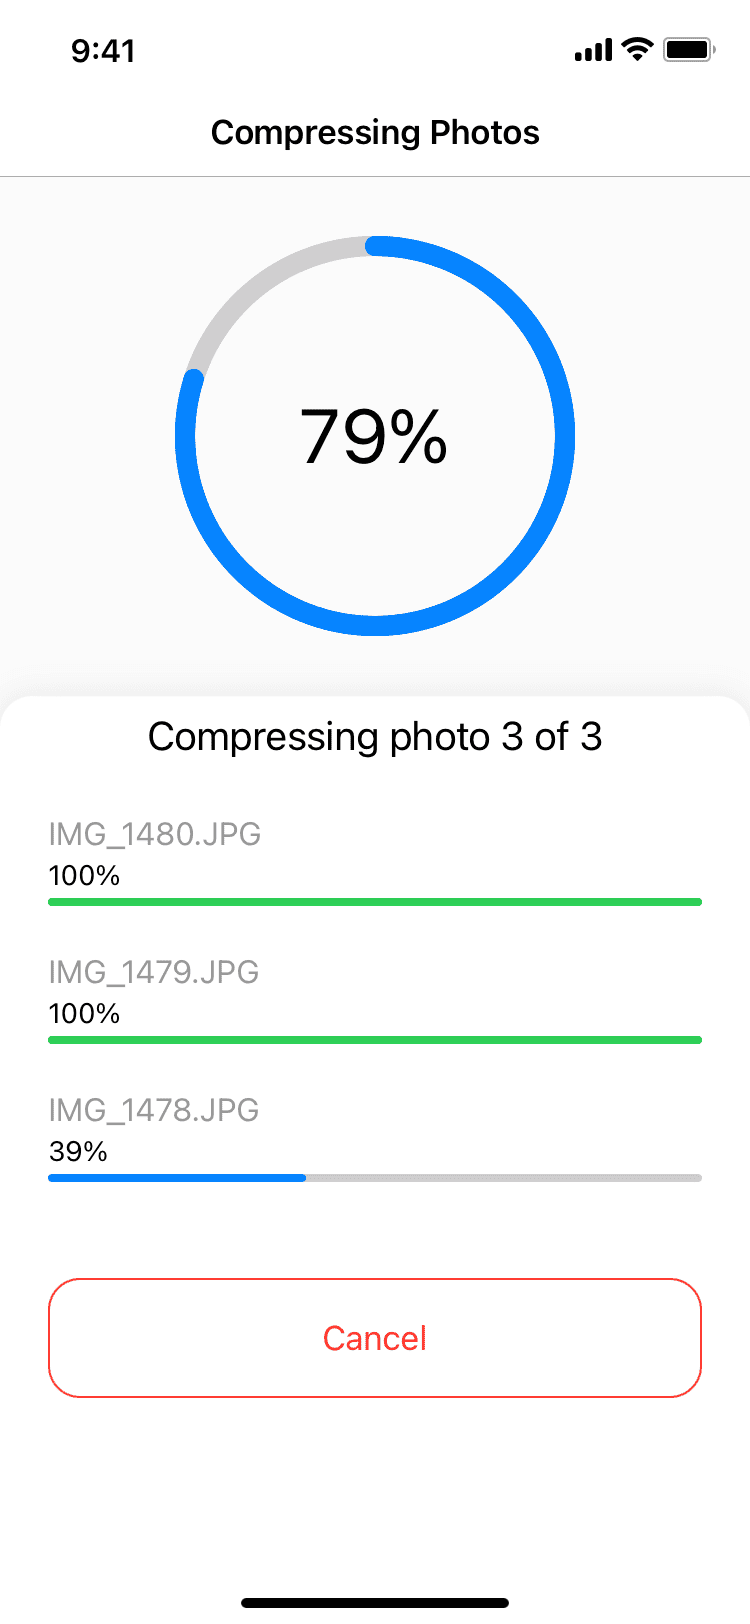 Compressing photos on iPhone